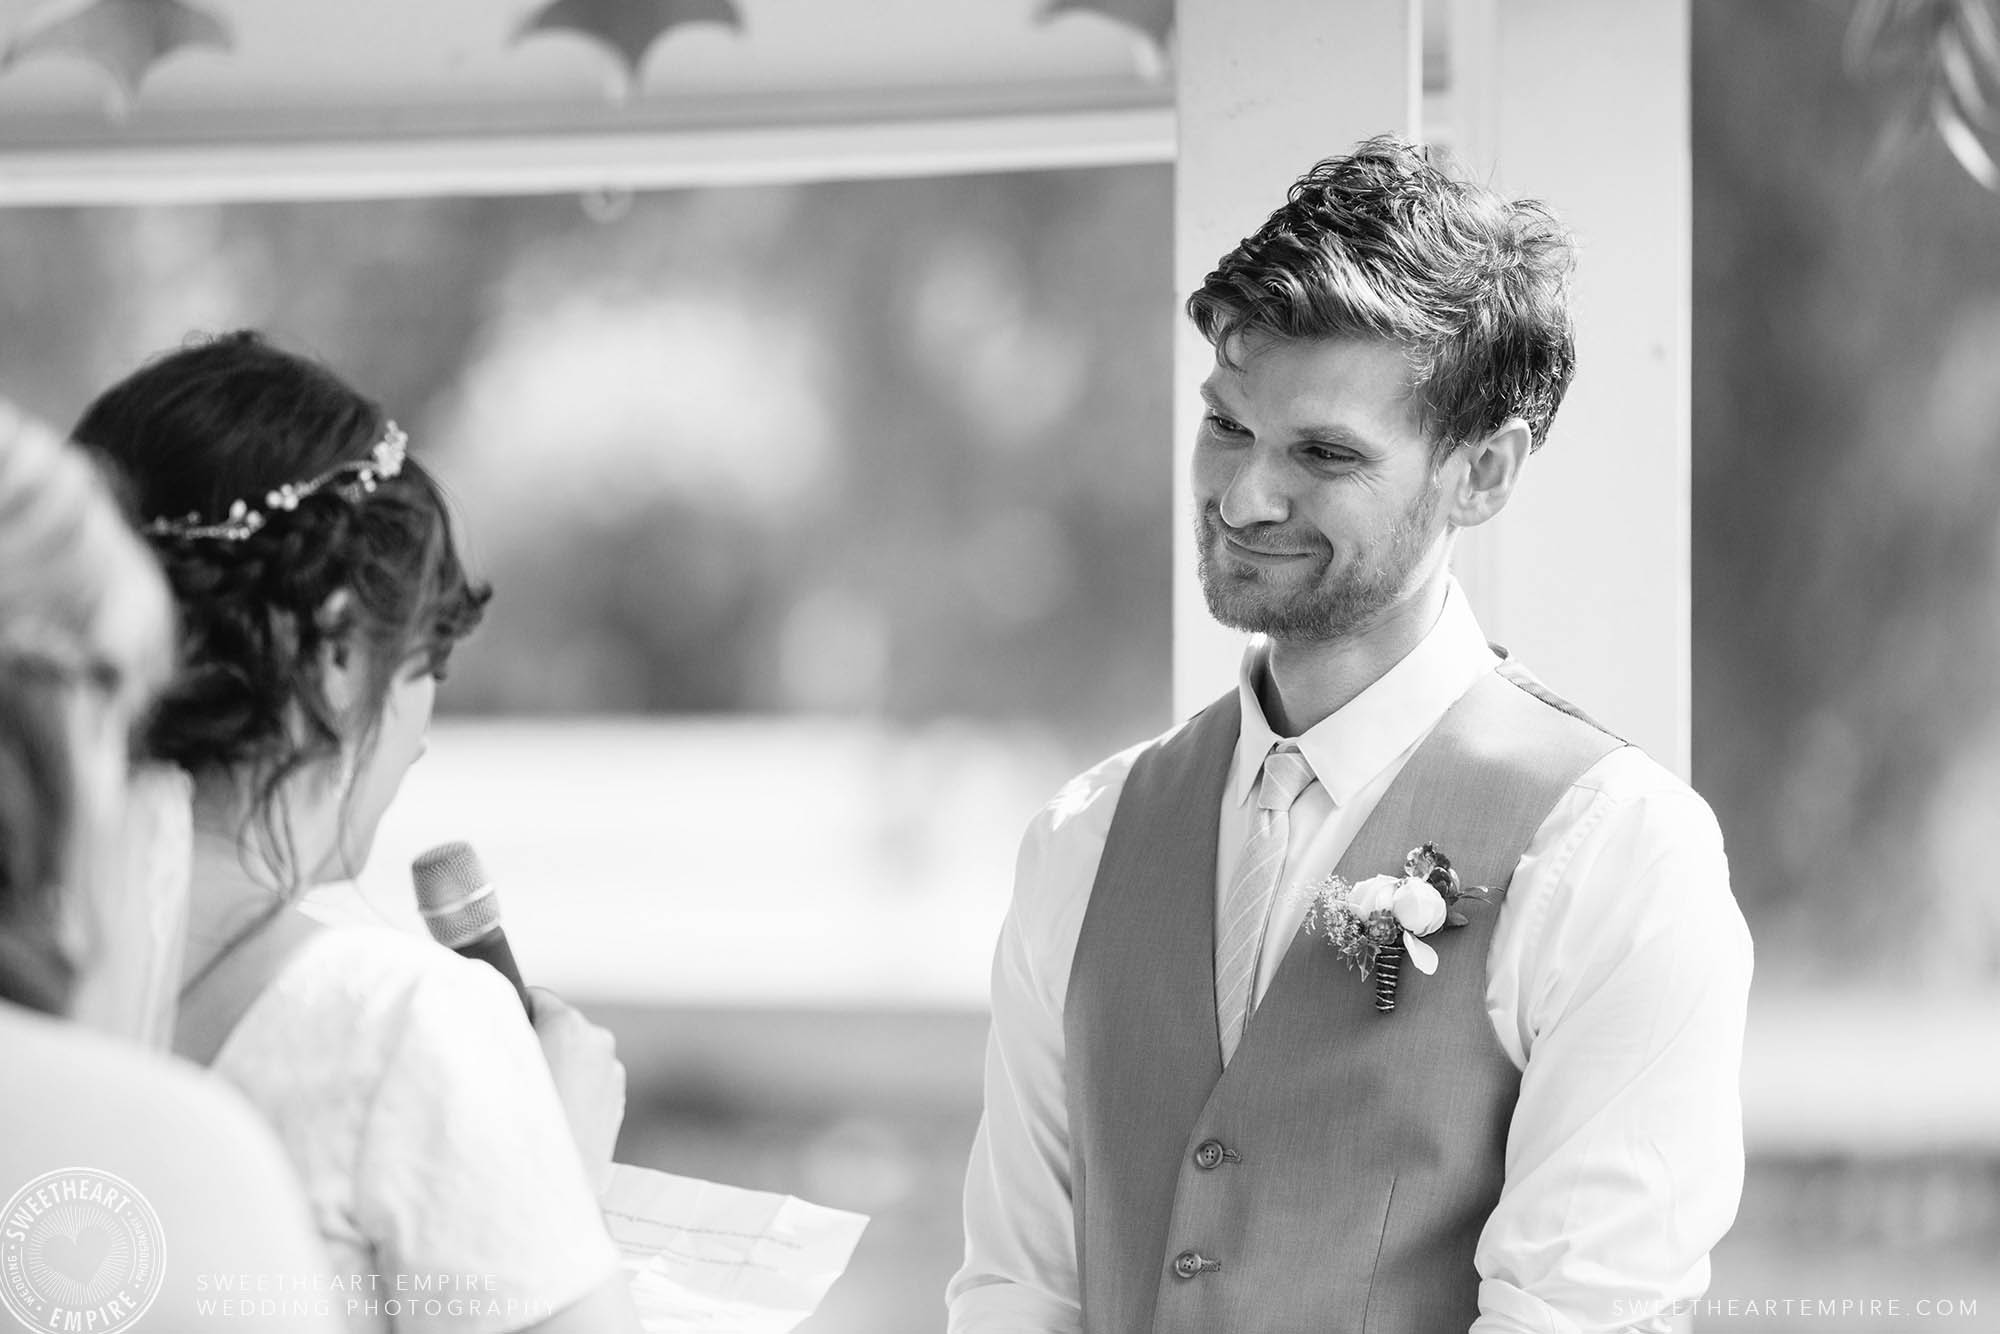 Teary-eyed groom listening to his bride say her vows.